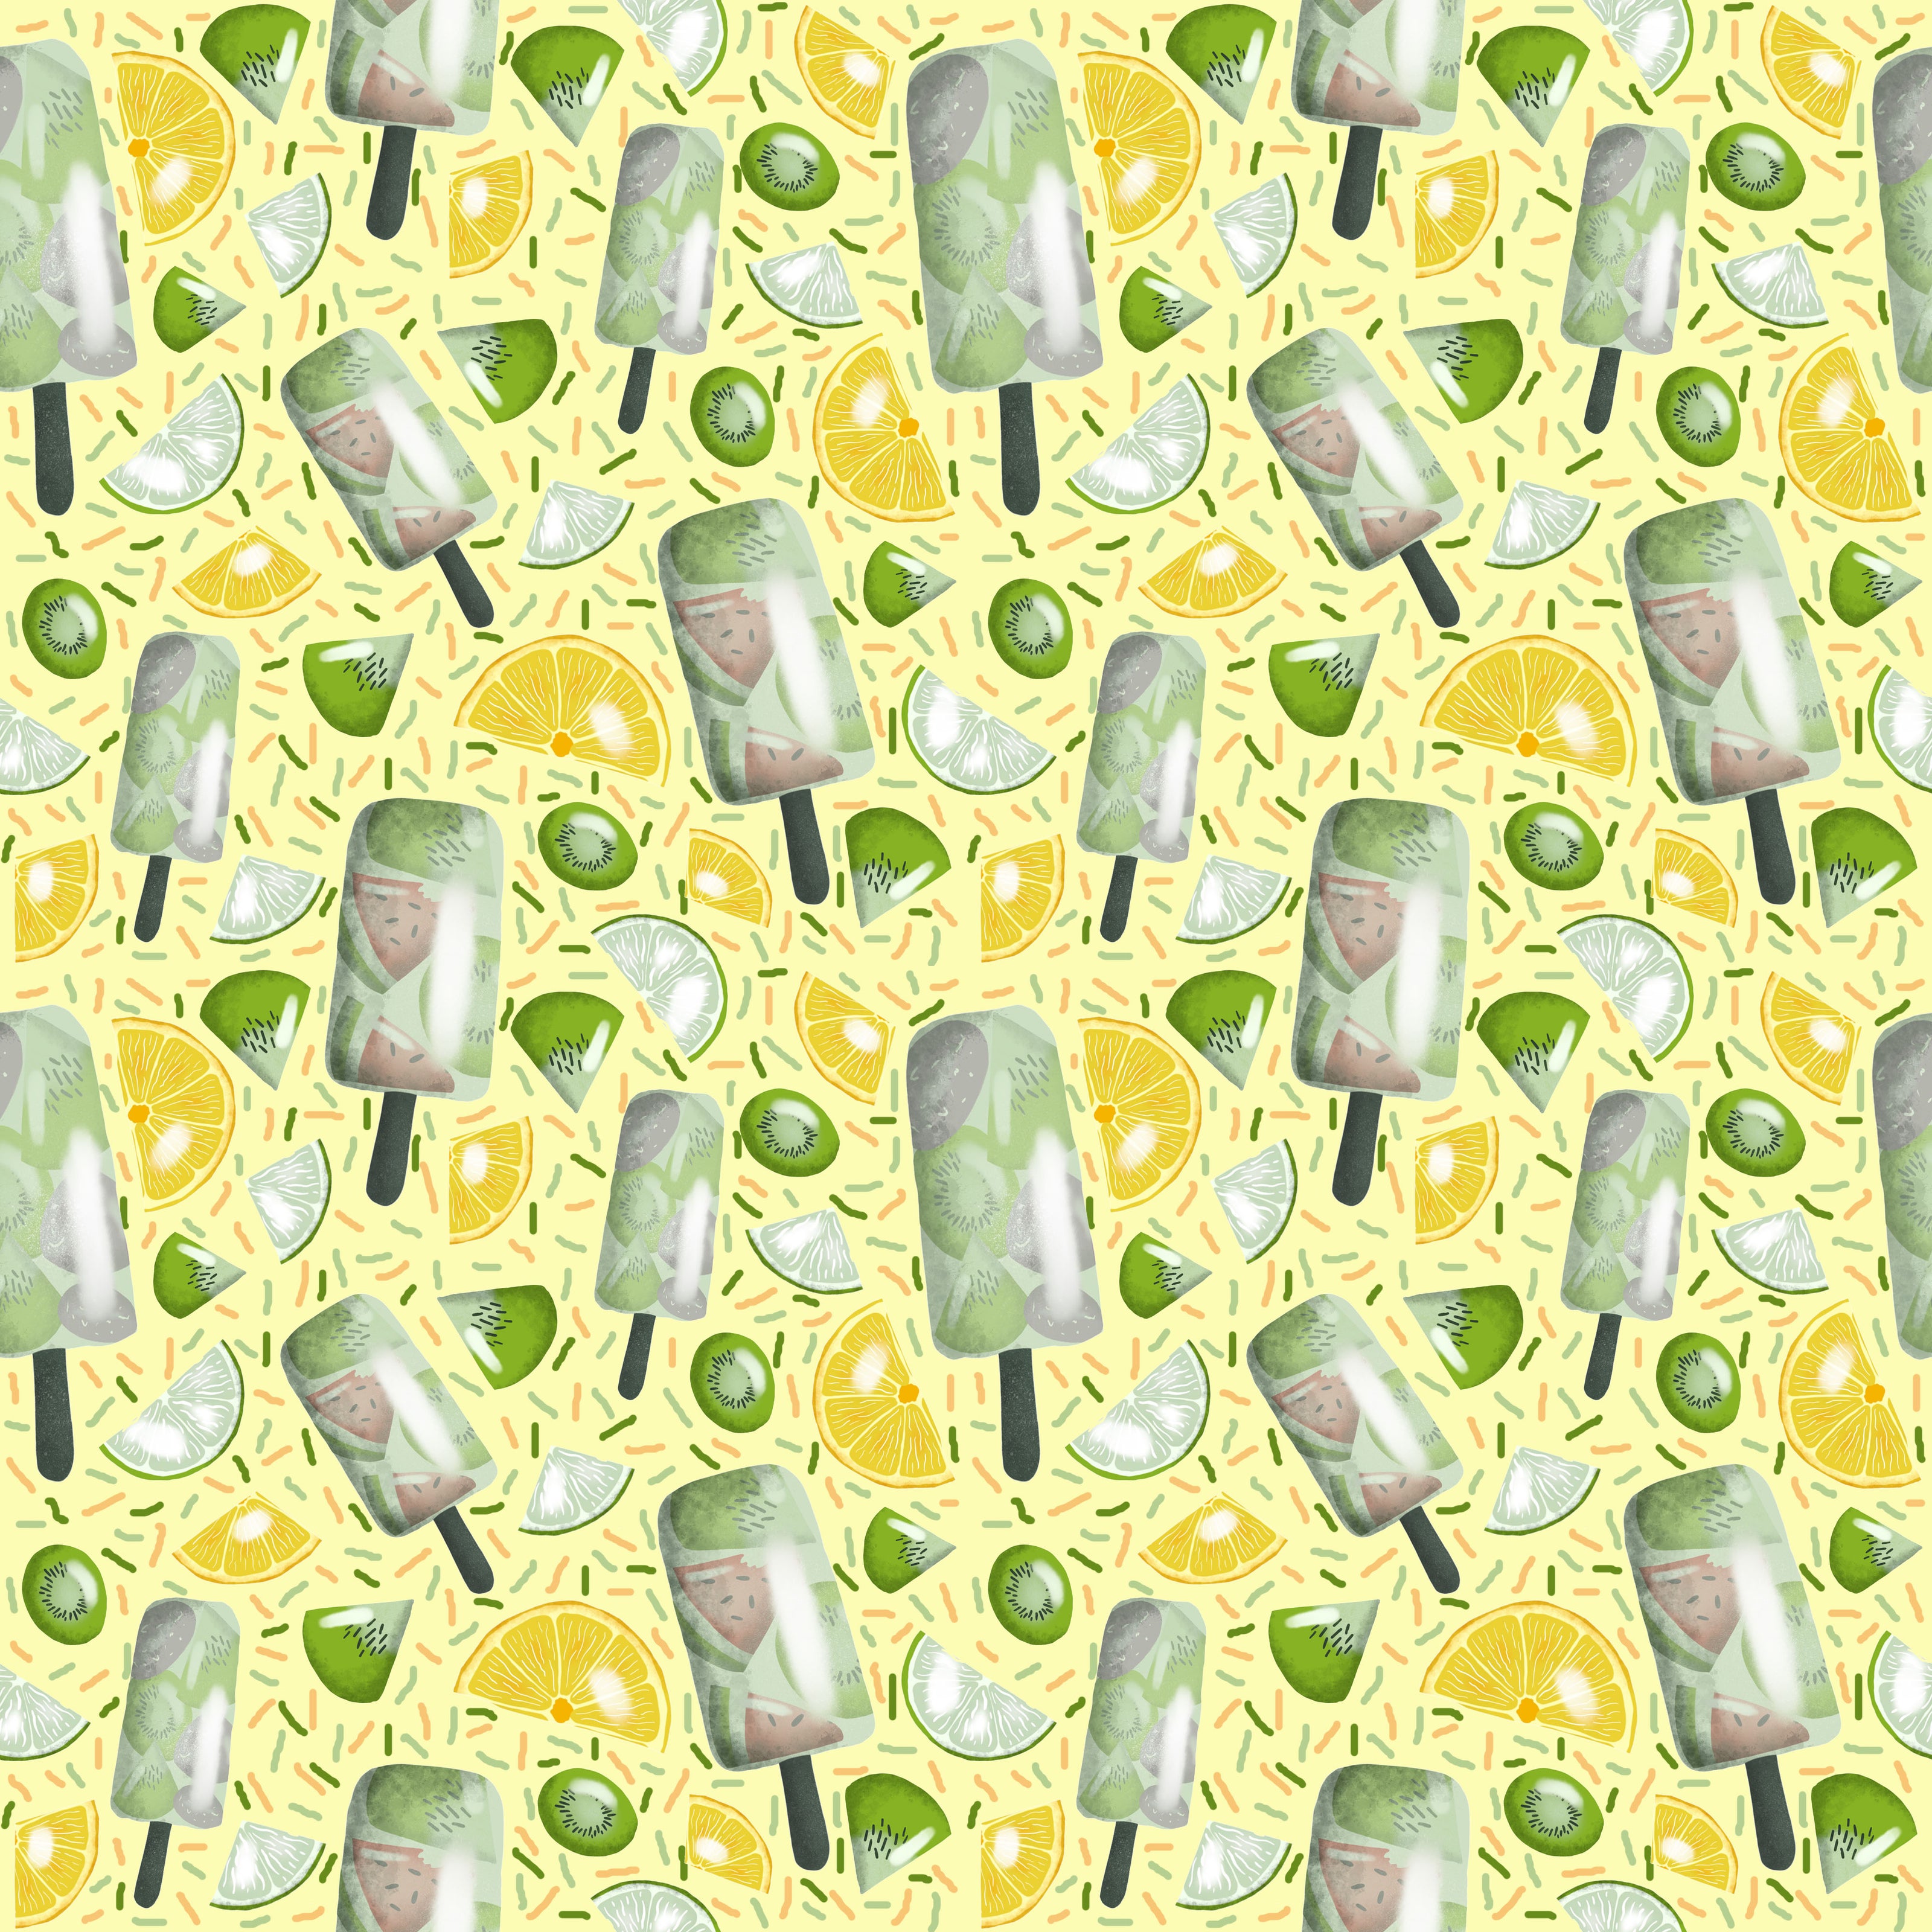 green and yellow ice lolly surface pattern design as a seamless repeat